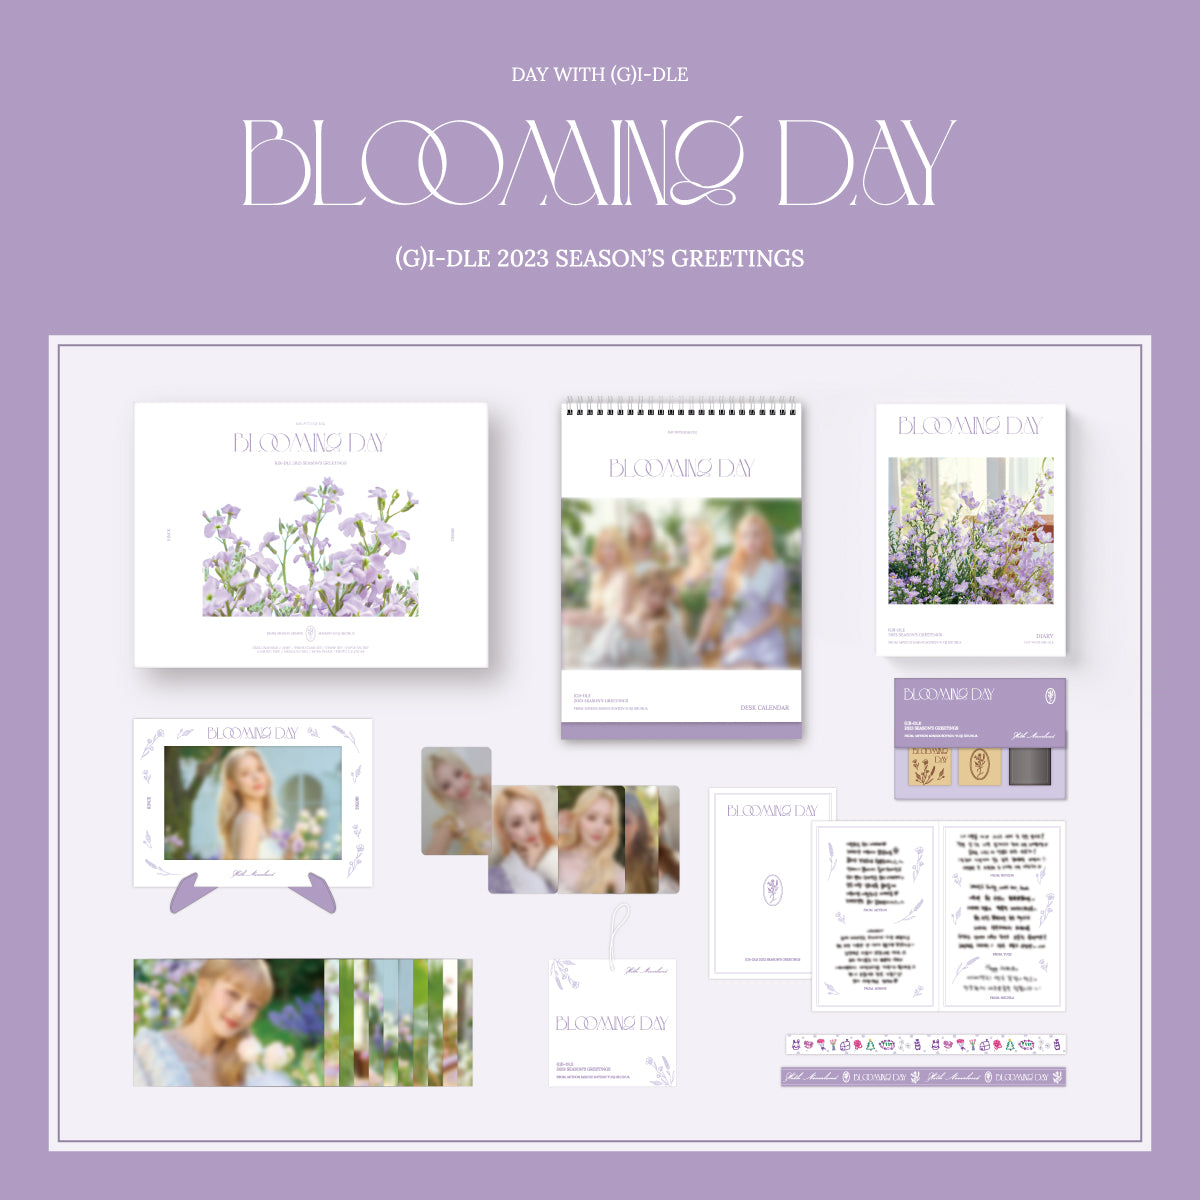 (G)I-DLE 2023 SEASON'S GREETINGS 'BLOOMING DAY' COVER IMAGE